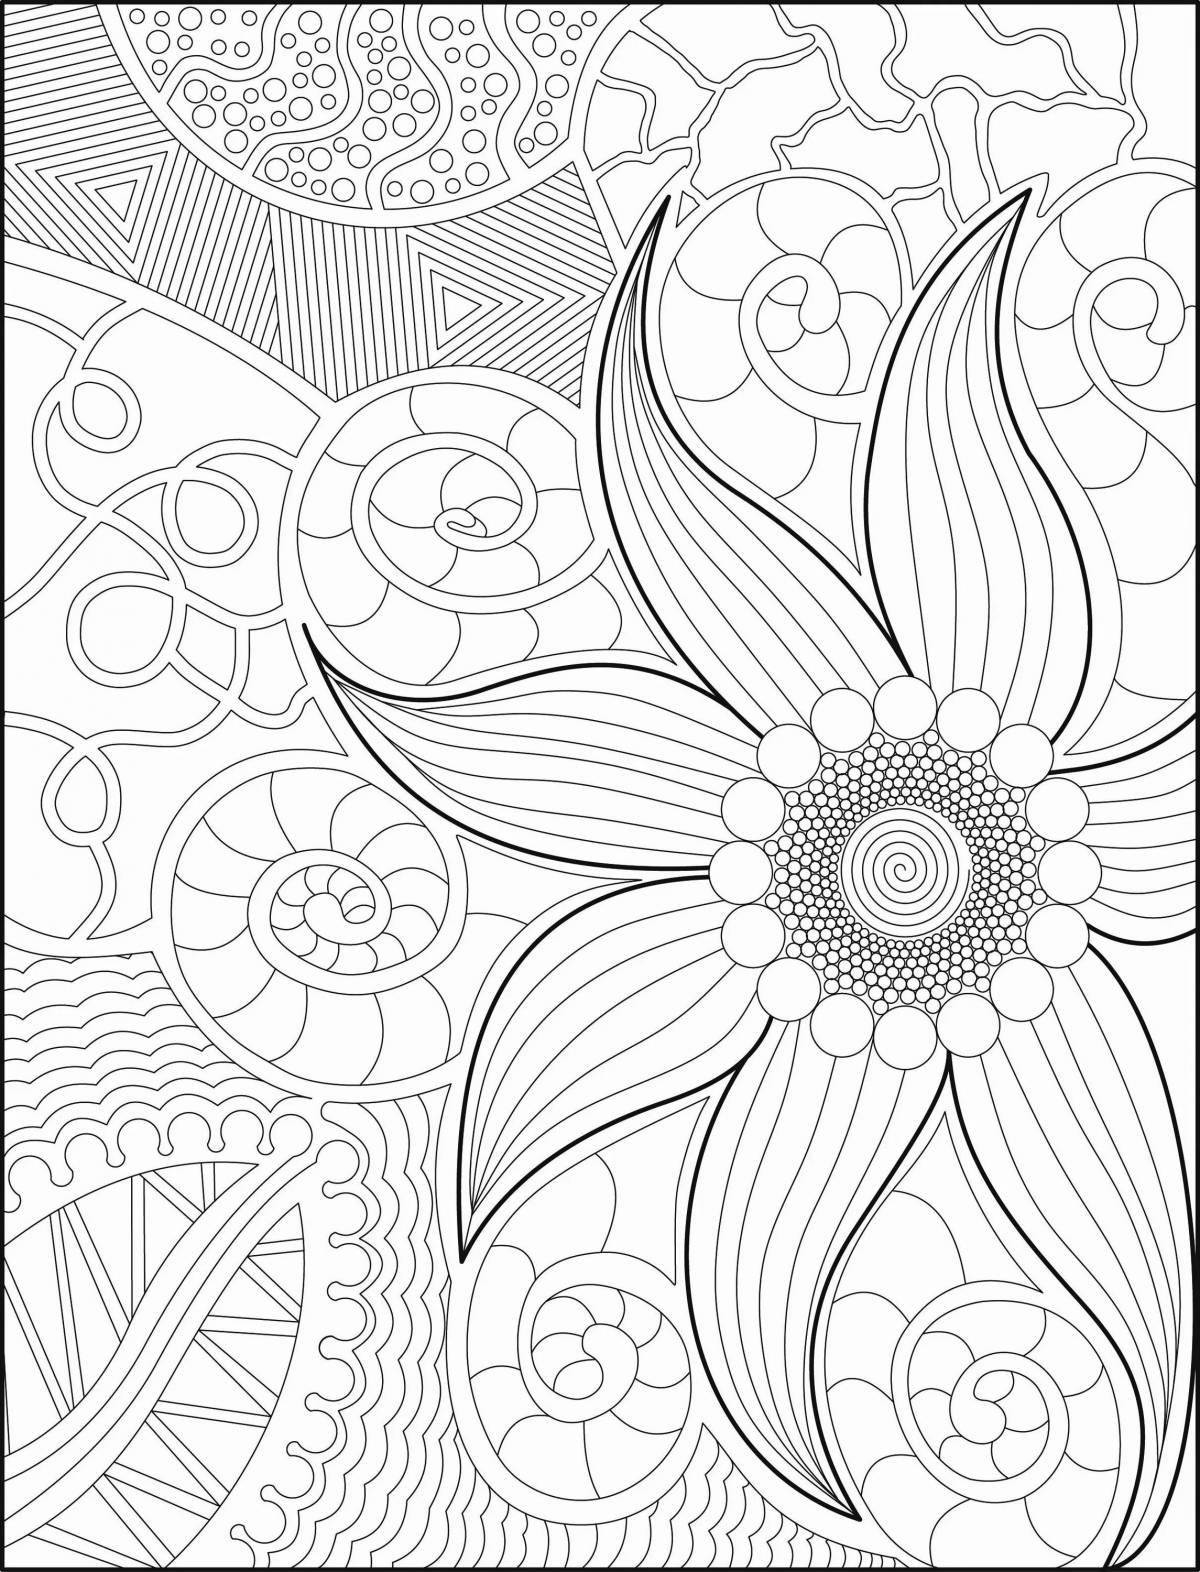 Fascinating coloring book relaxation